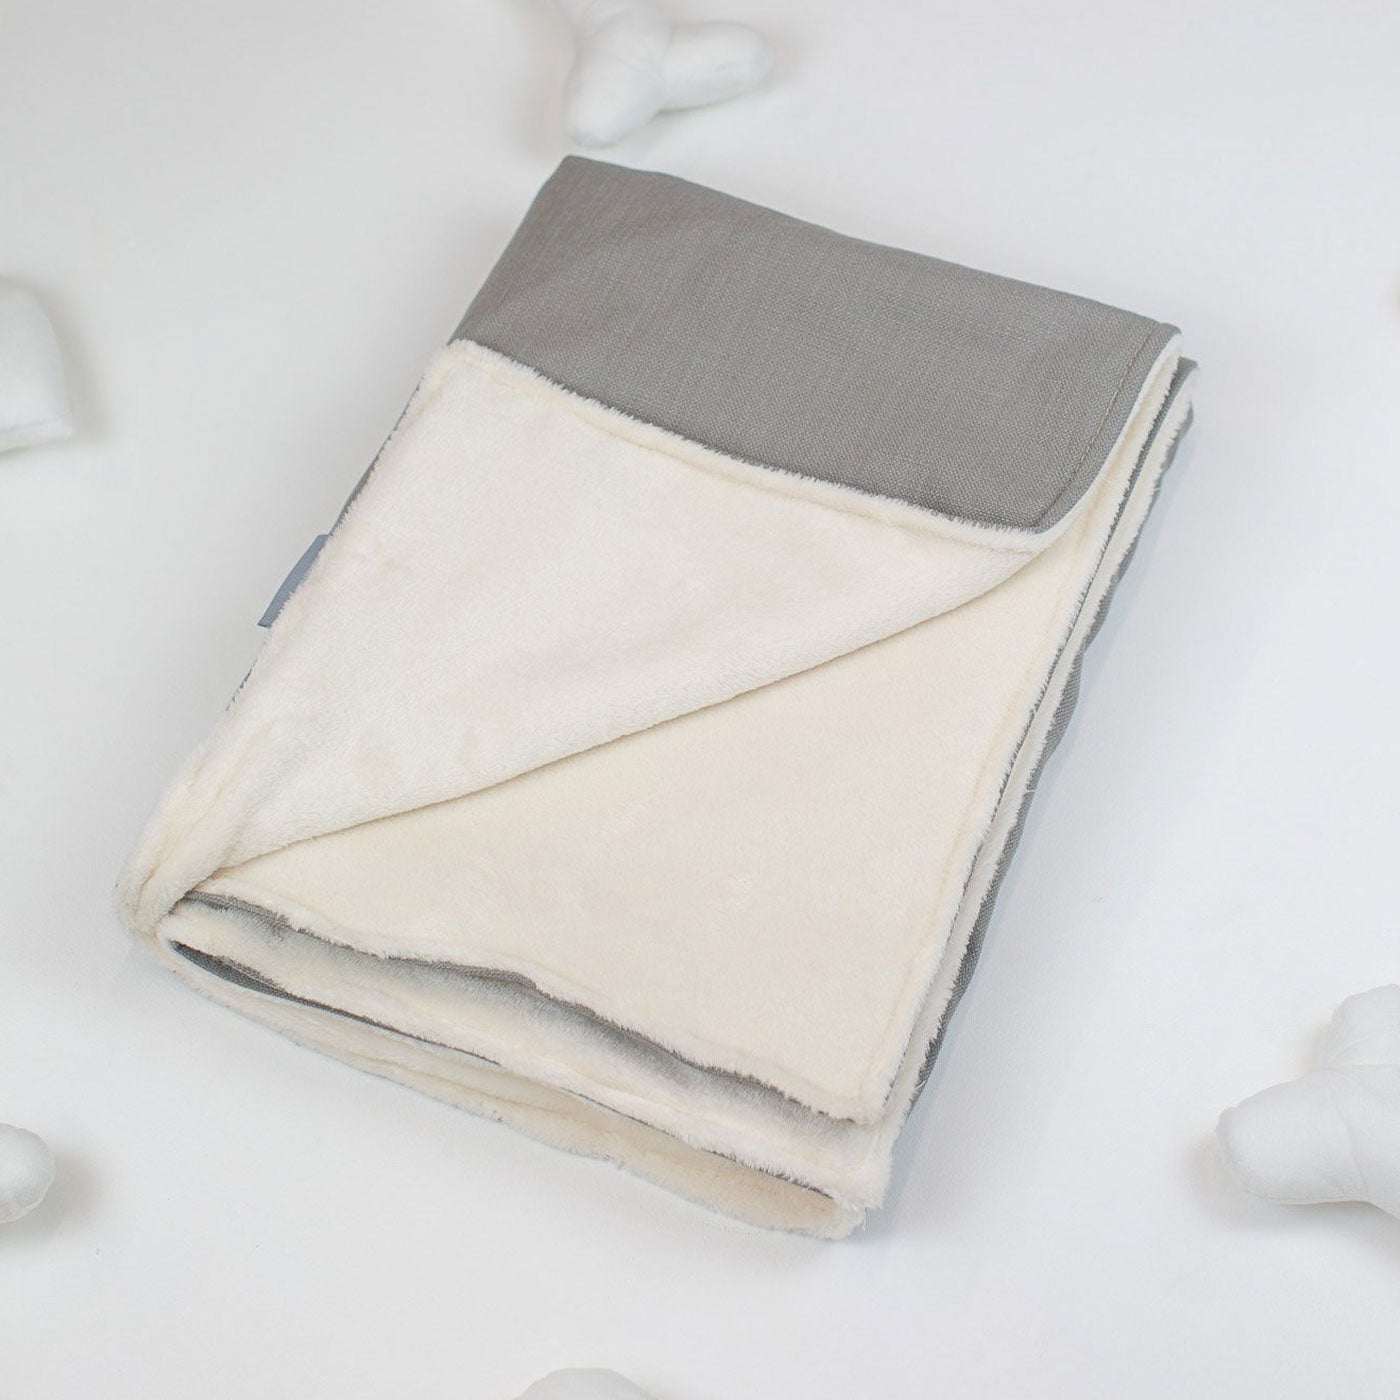 [color:savanna stone] Super Soft Sherpa & Teddy Fleece Lining, Our Luxury Cat & Kitten Blanket In Stunning Savanna Stone The Perfect Cat Bed Accessory! Available To Personalize at Lords & Labradors US